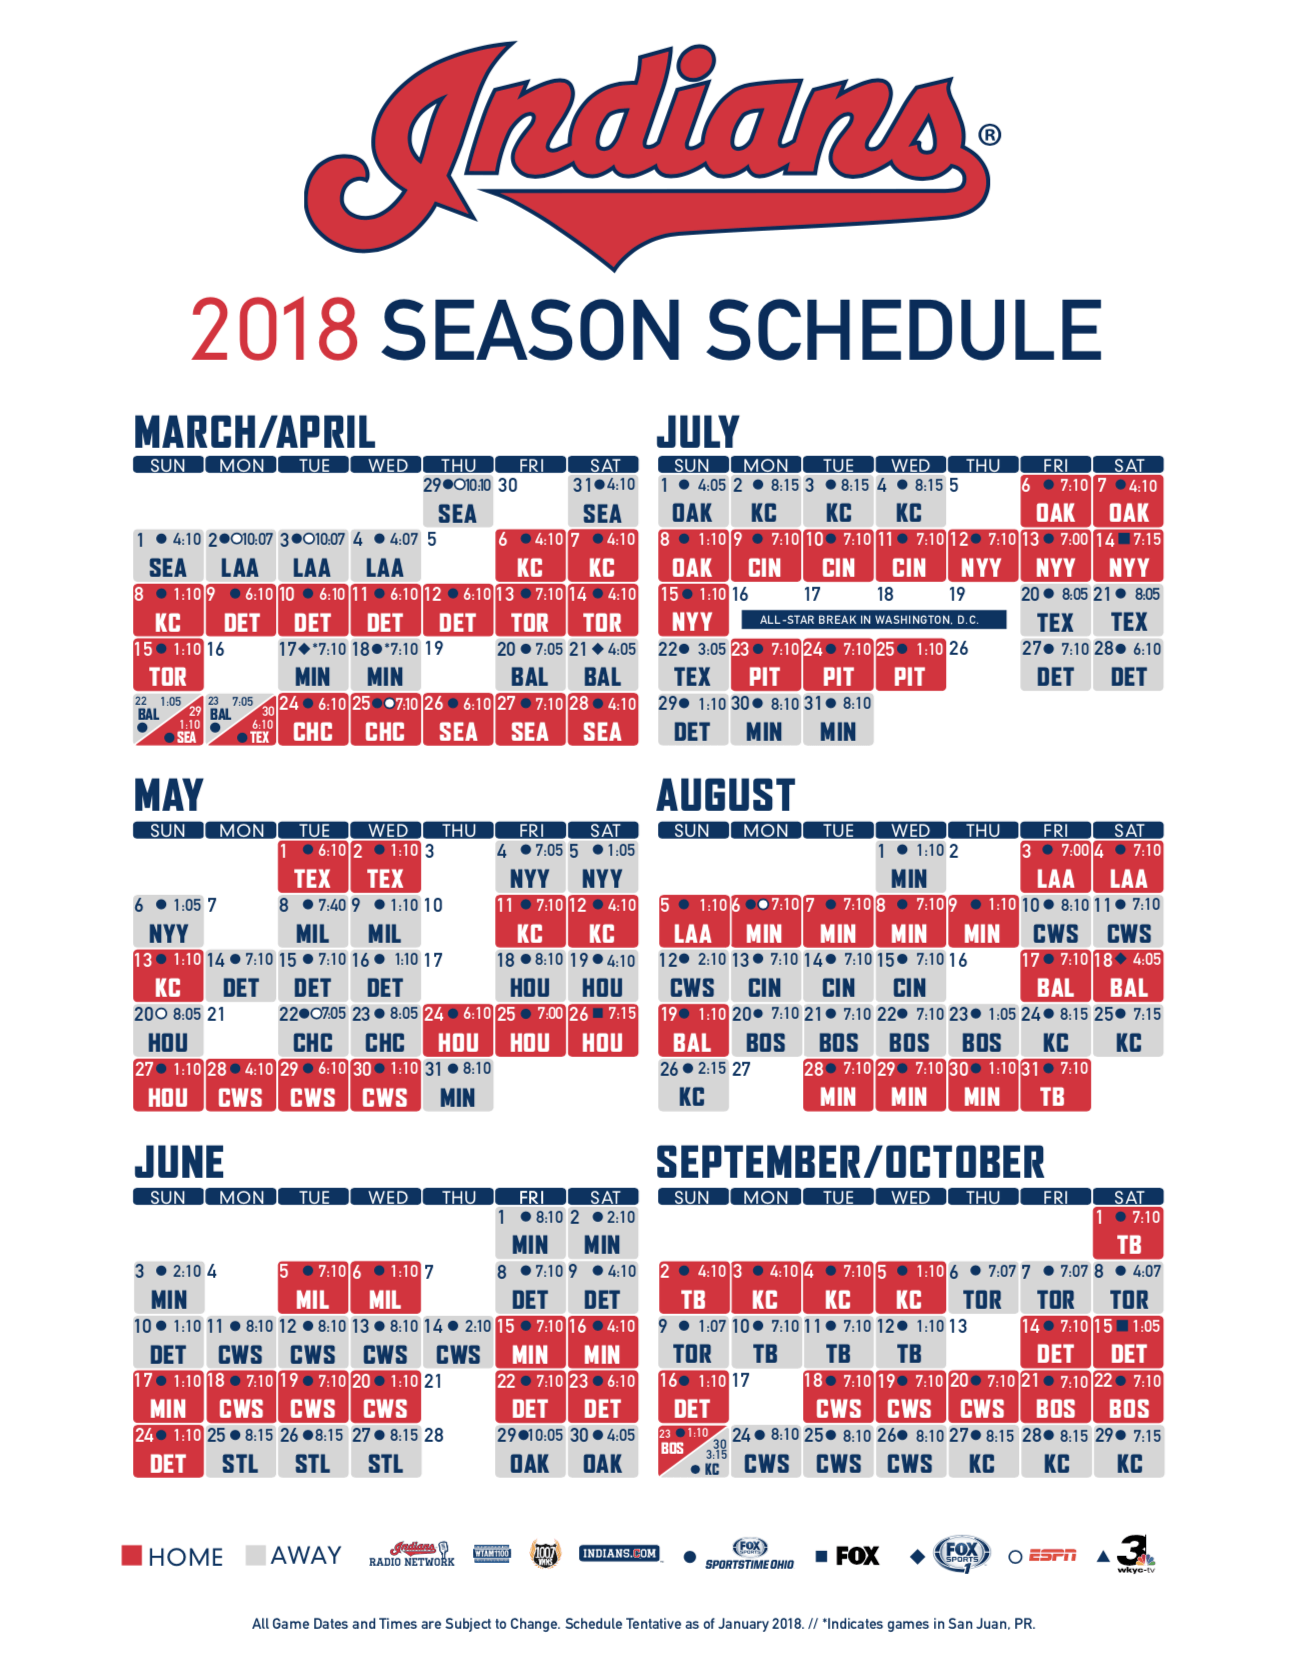 Cleveland Indians release 2018 schedule game times and broadcast